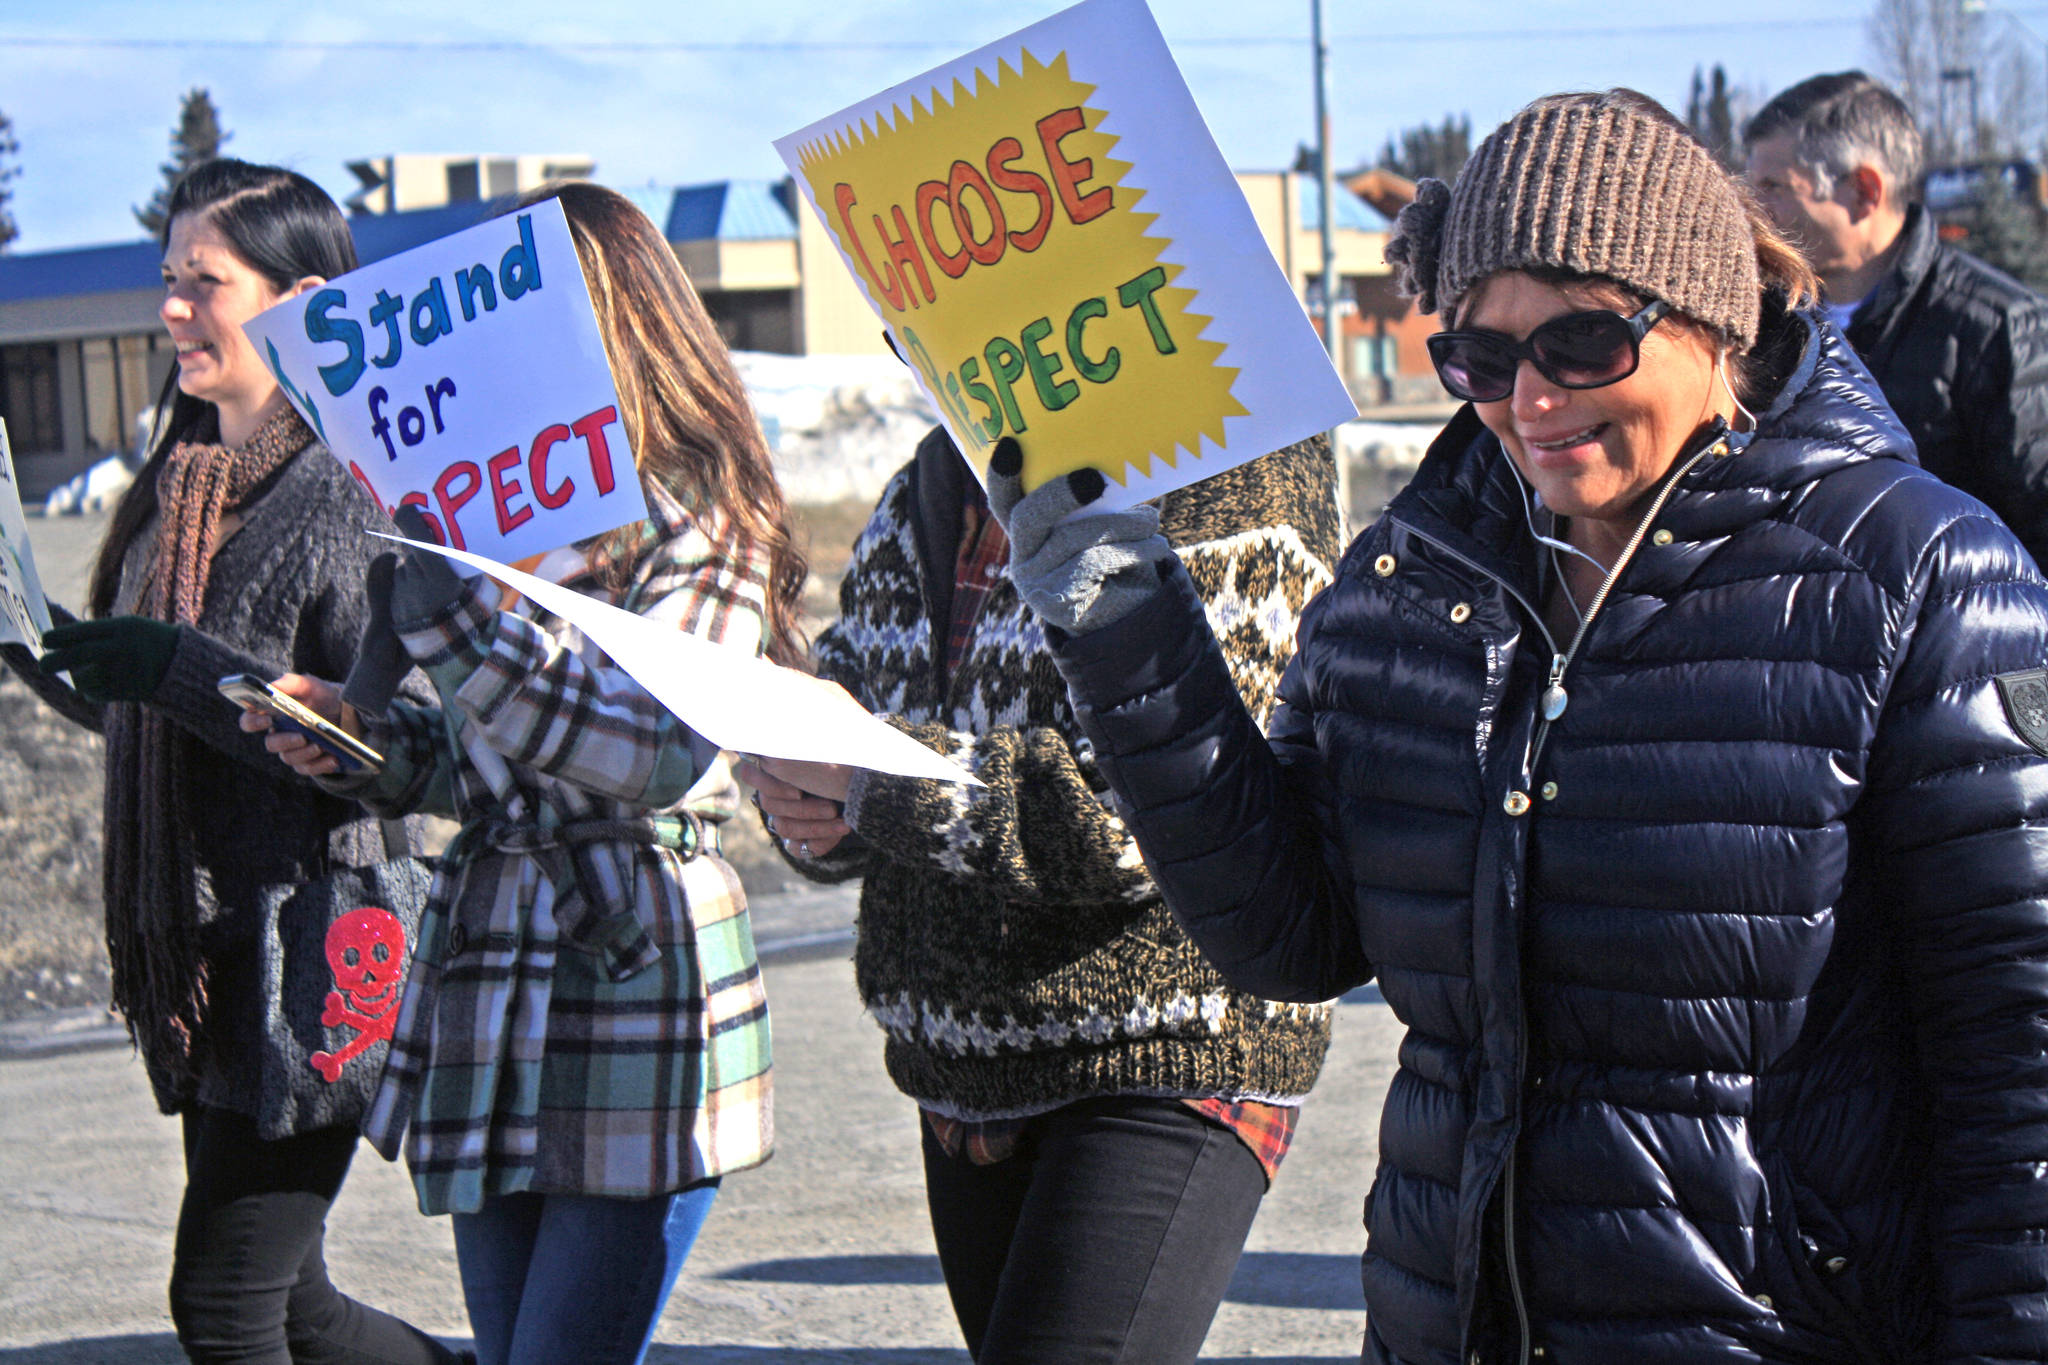 Marchers make their way along Frontage Road to the Kenai Visitor and Cultural Center as part of the Alaskans Choose Respect Awareness Event, hosted by the LeeShore Center on March 28. (Photo by Erin Thompson/Peninsula Clarion)